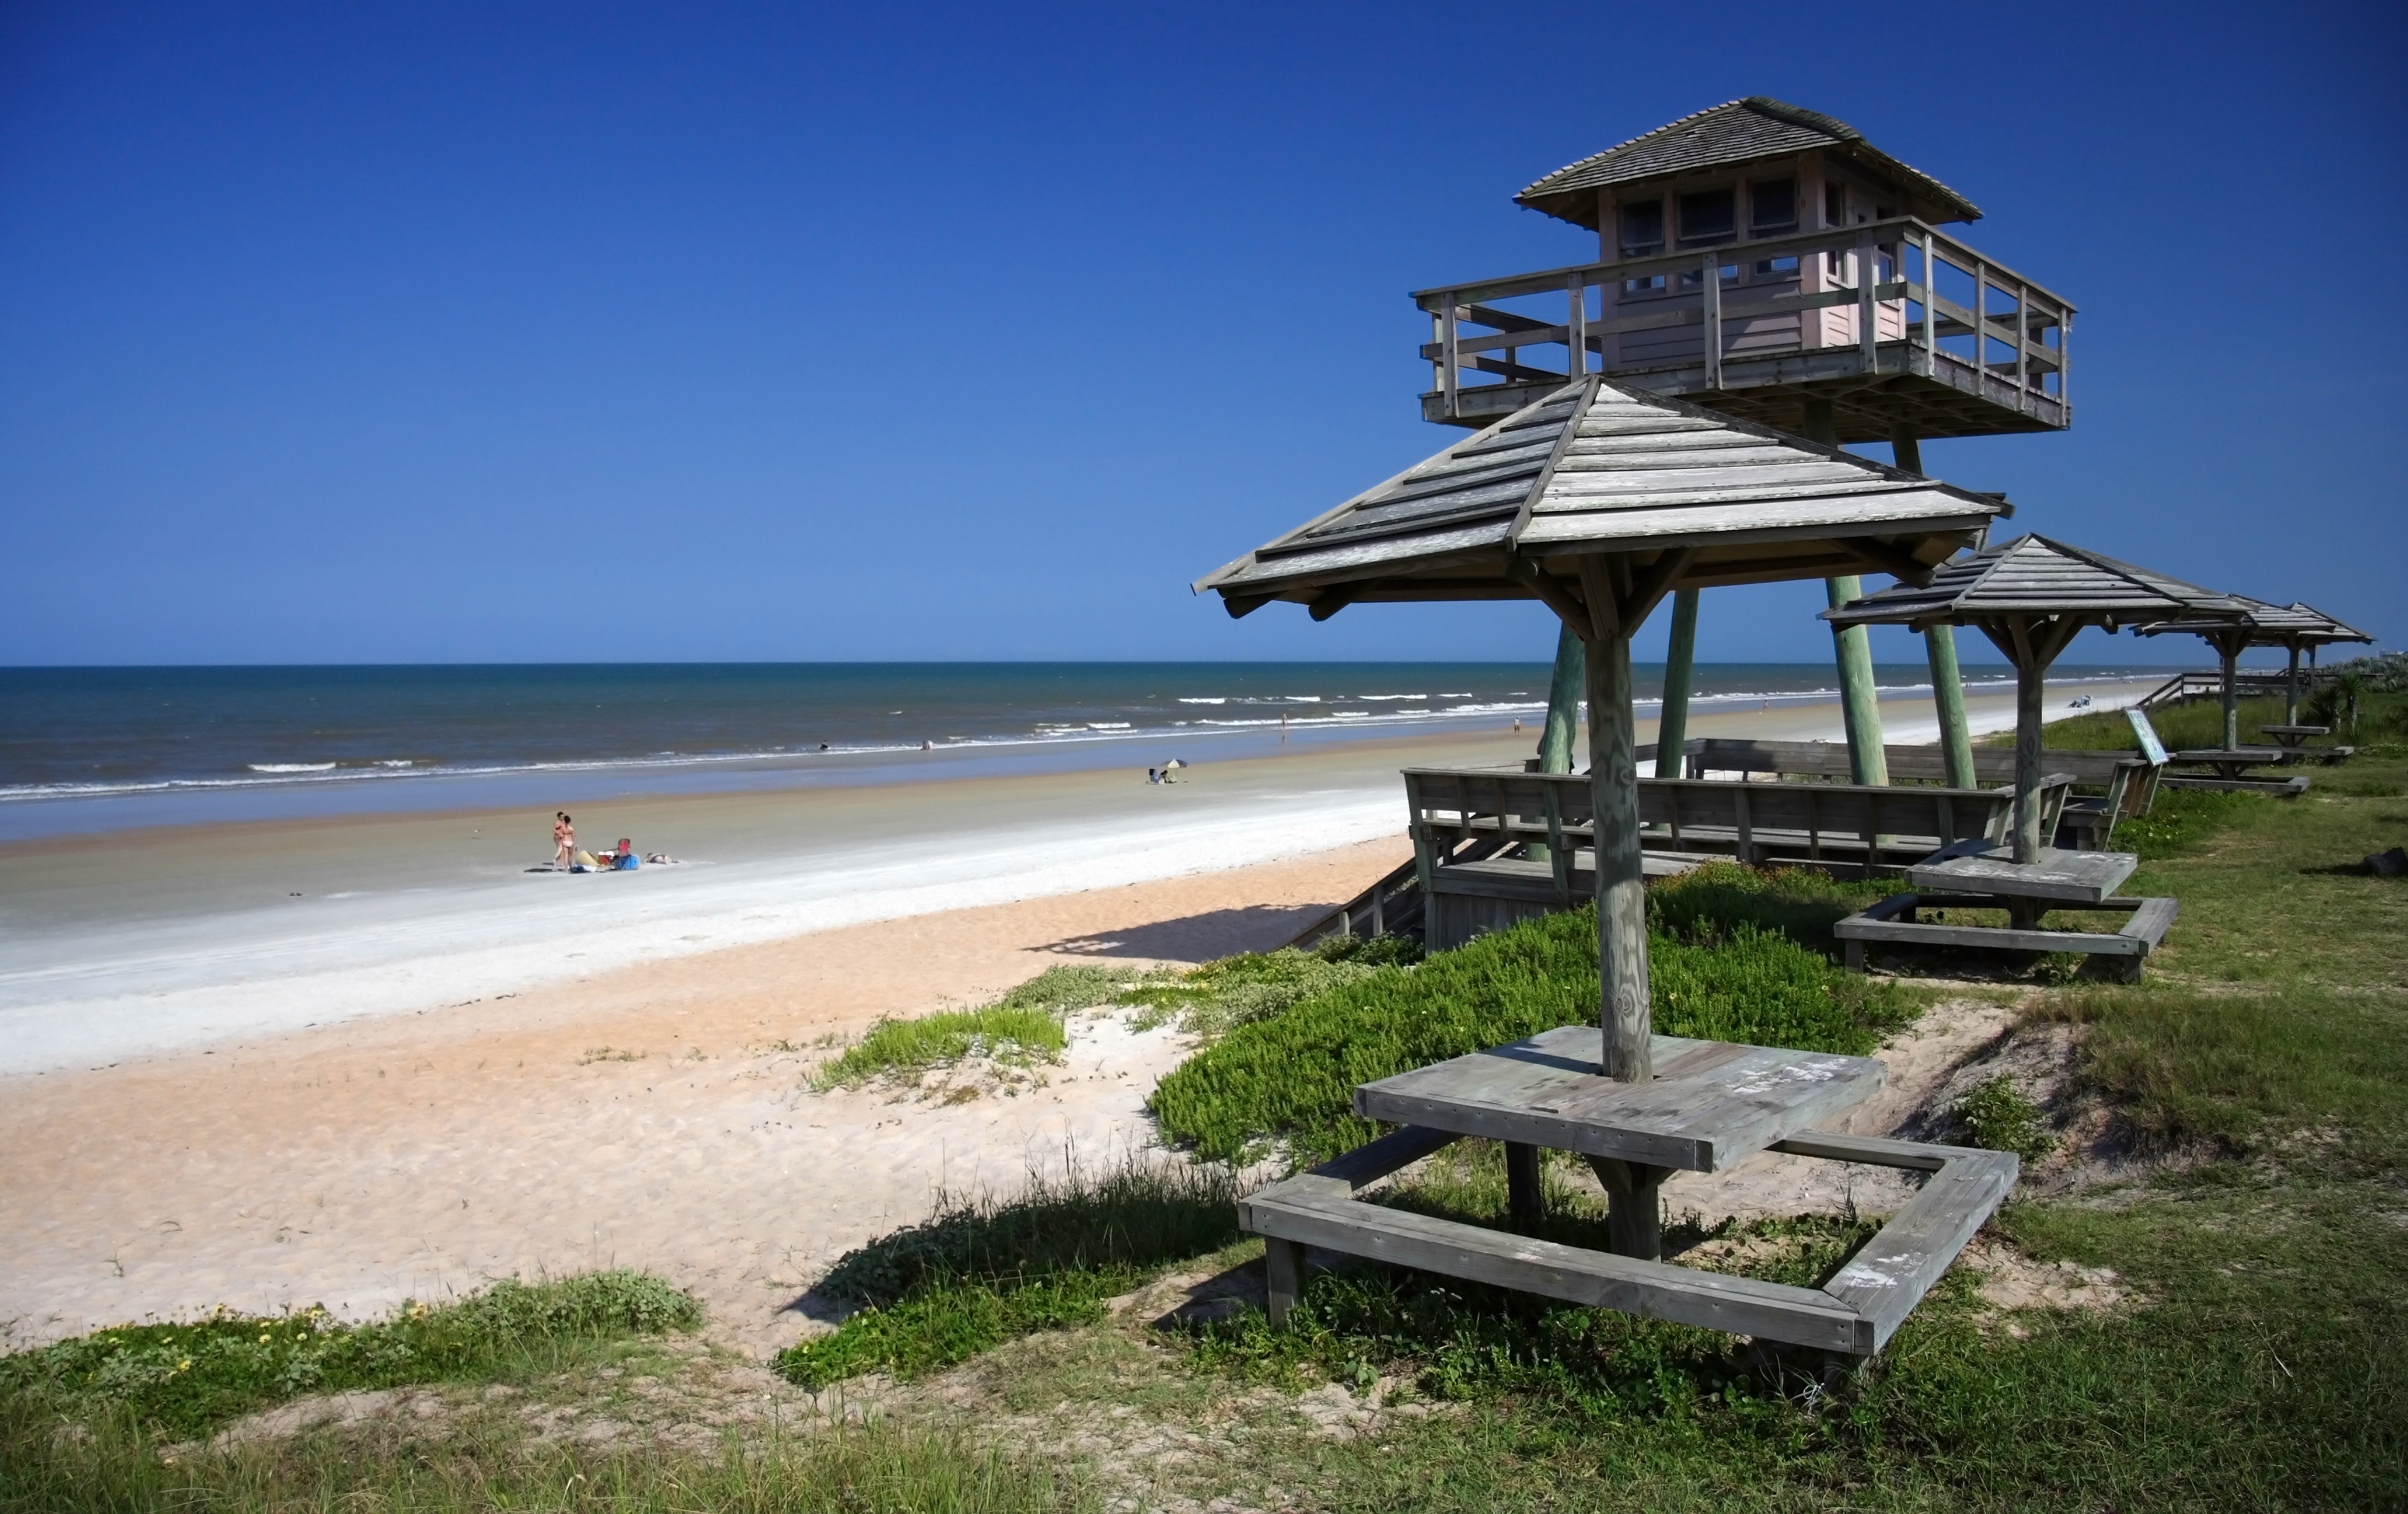 <h2>Top-rated places to stay near the beach in Flagler Beach</h2>